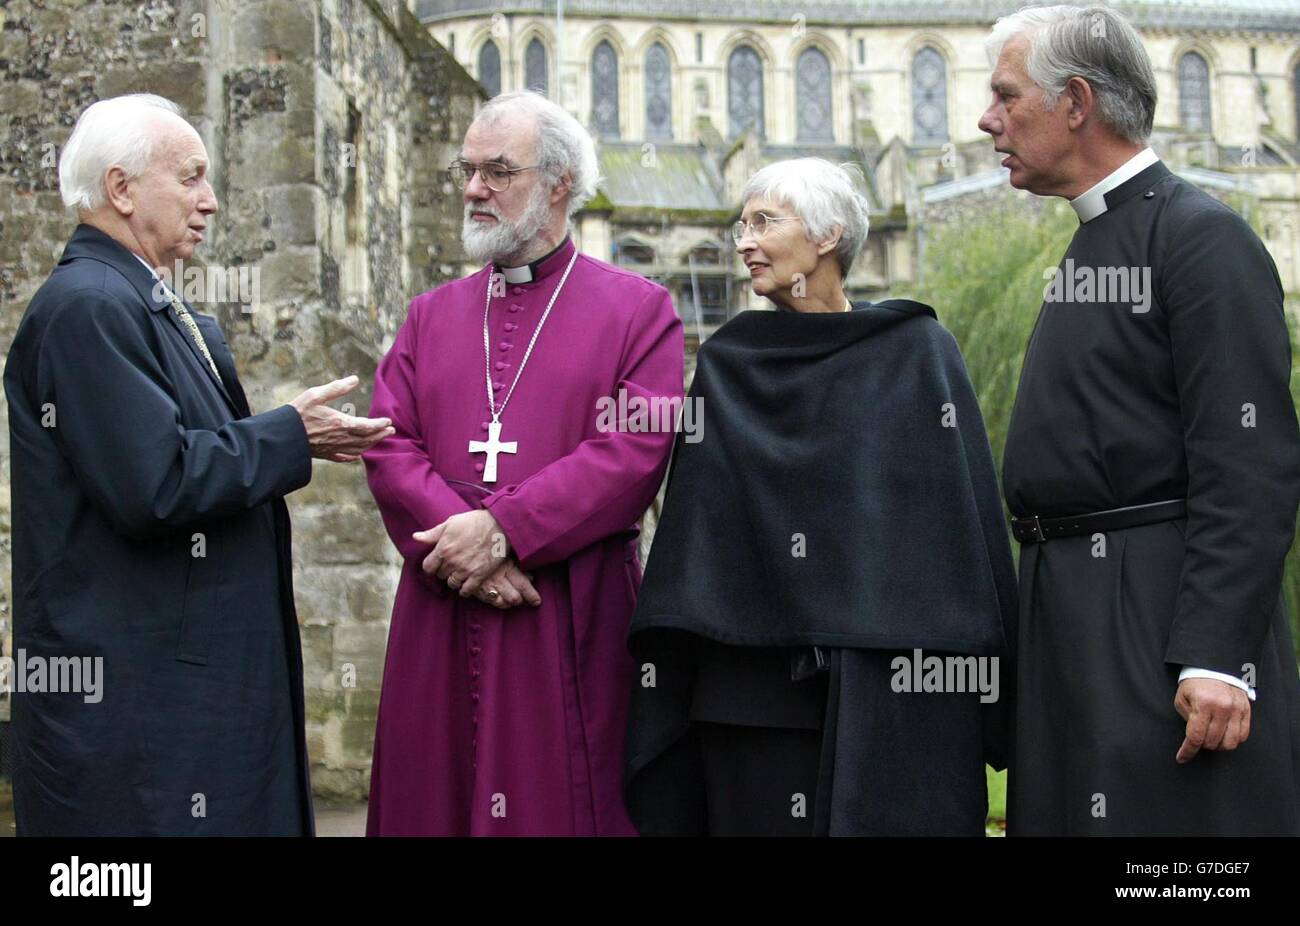 The President of Hungary, His Excellency Ferenc Madl (left) the Archbishop of Canterbury Dr Rowan Williams (second left) the Presidents wife Dalma Madl the Dean of Canterbury Cathedral The Very Revd. Robert Willis at Canterbury Cathedral, Kent, as part of the Canterbury festival celebrations. The President was visiting as part of the year long celebration of Hungarian Culture in the UK called 'Magyar Magic' - Hungary in focus 2004. Stock Photo